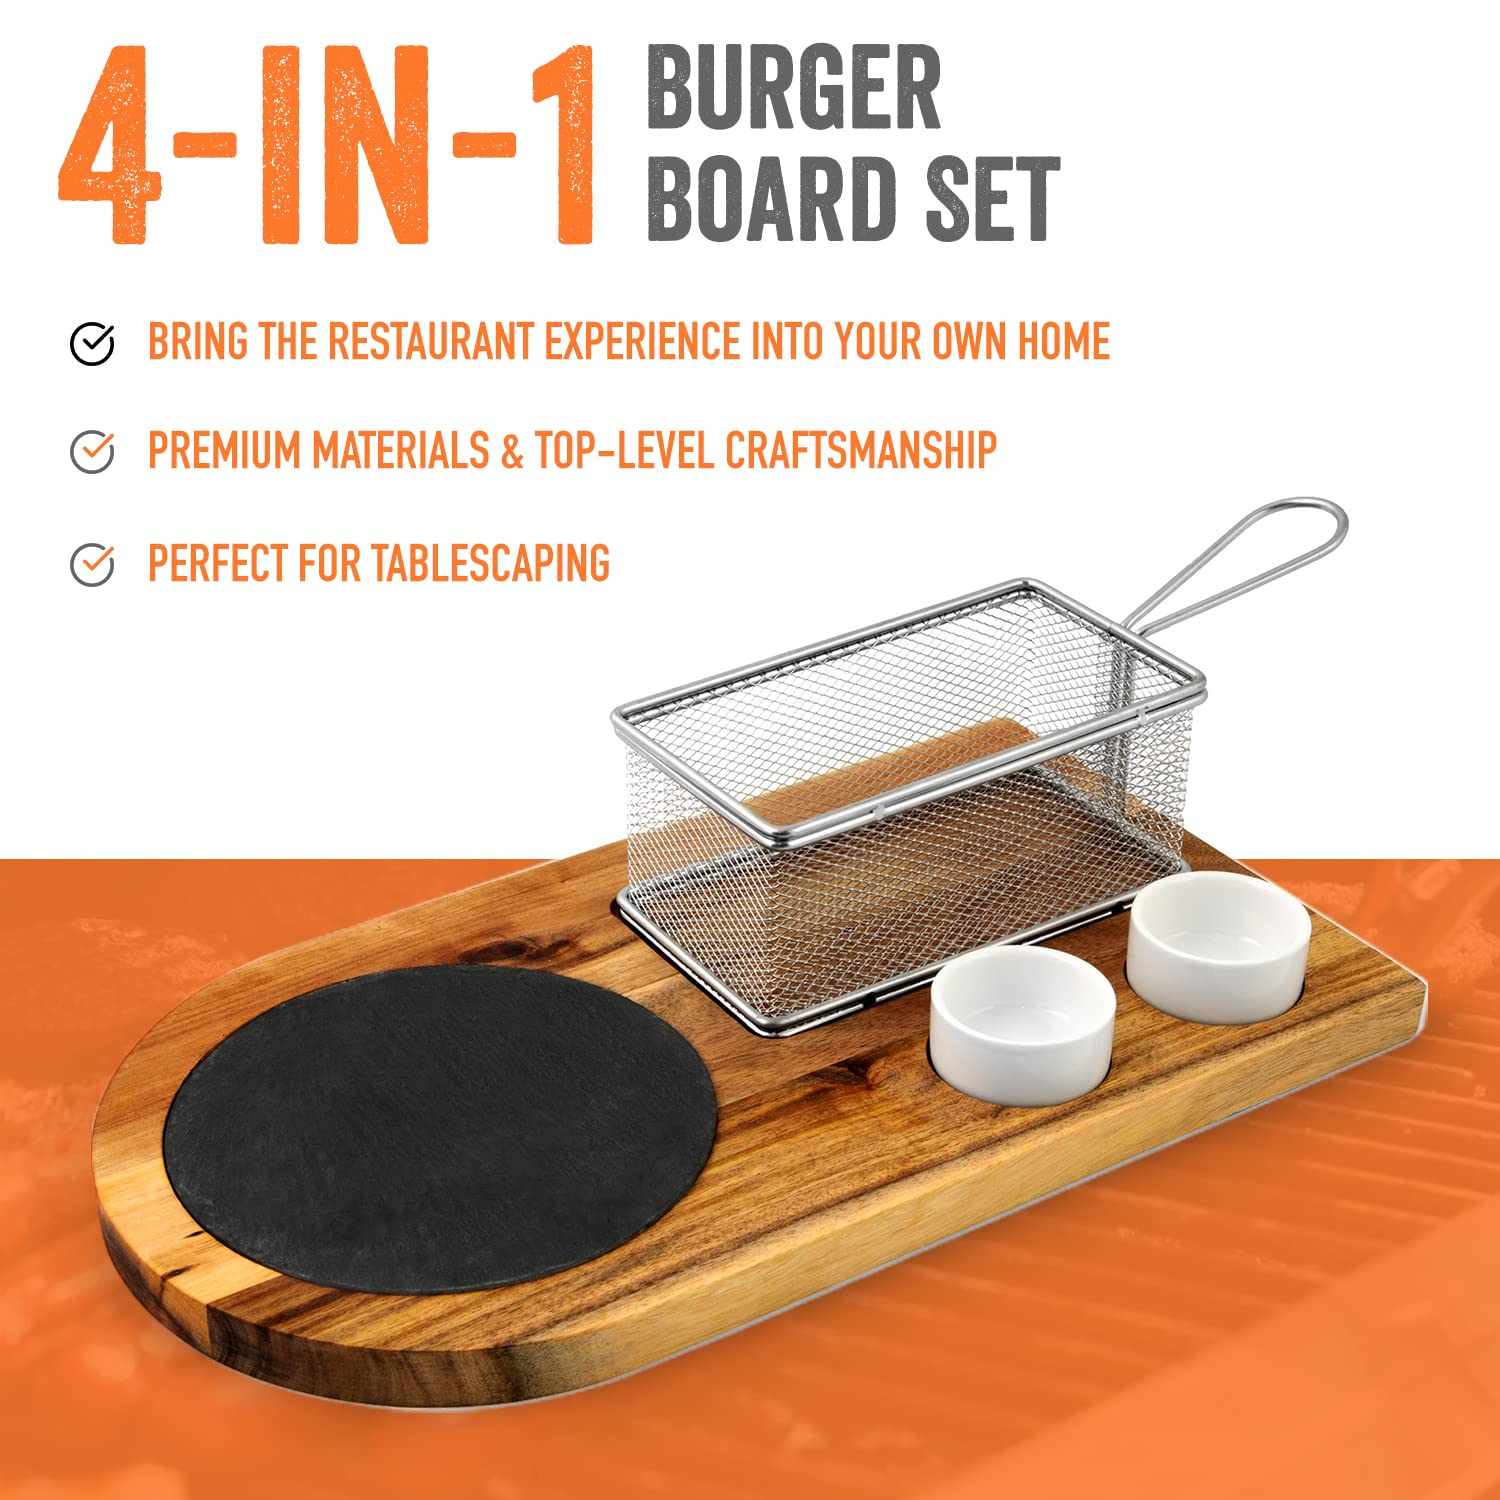 Yukon Glory™ Burger Serving Set, Perfect For Foodies, Burger Lovers and Tablescapes, Includes Premium Acacia Wood Board With Slate, Stainless Steel Fry Basket and Porcelain Condiment Cups,